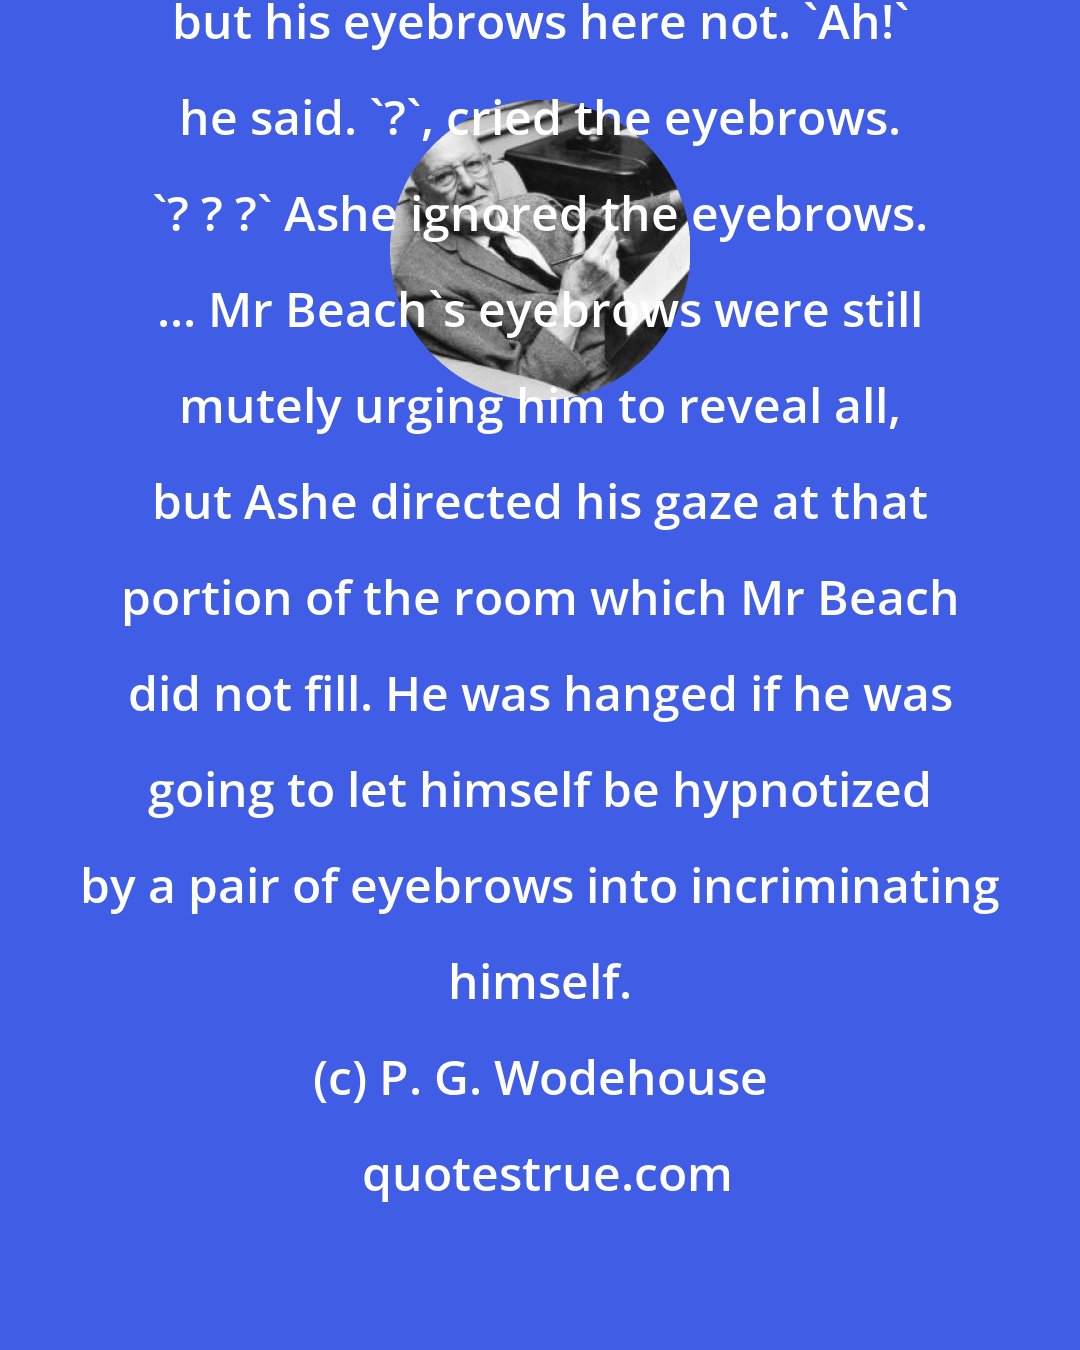 P. G. Wodehouse: Mr Beach was too well bred to be inquisitive, but his eyebrows here not. 'Ah!' he said. '?', cried the eyebrows. '? ? ?' Ashe ignored the eyebrows. ... Mr Beach's eyebrows were still mutely urging him to reveal all, but Ashe directed his gaze at that portion of the room which Mr Beach did not fill. He was hanged if he was going to let himself be hypnotized by a pair of eyebrows into incriminating himself.